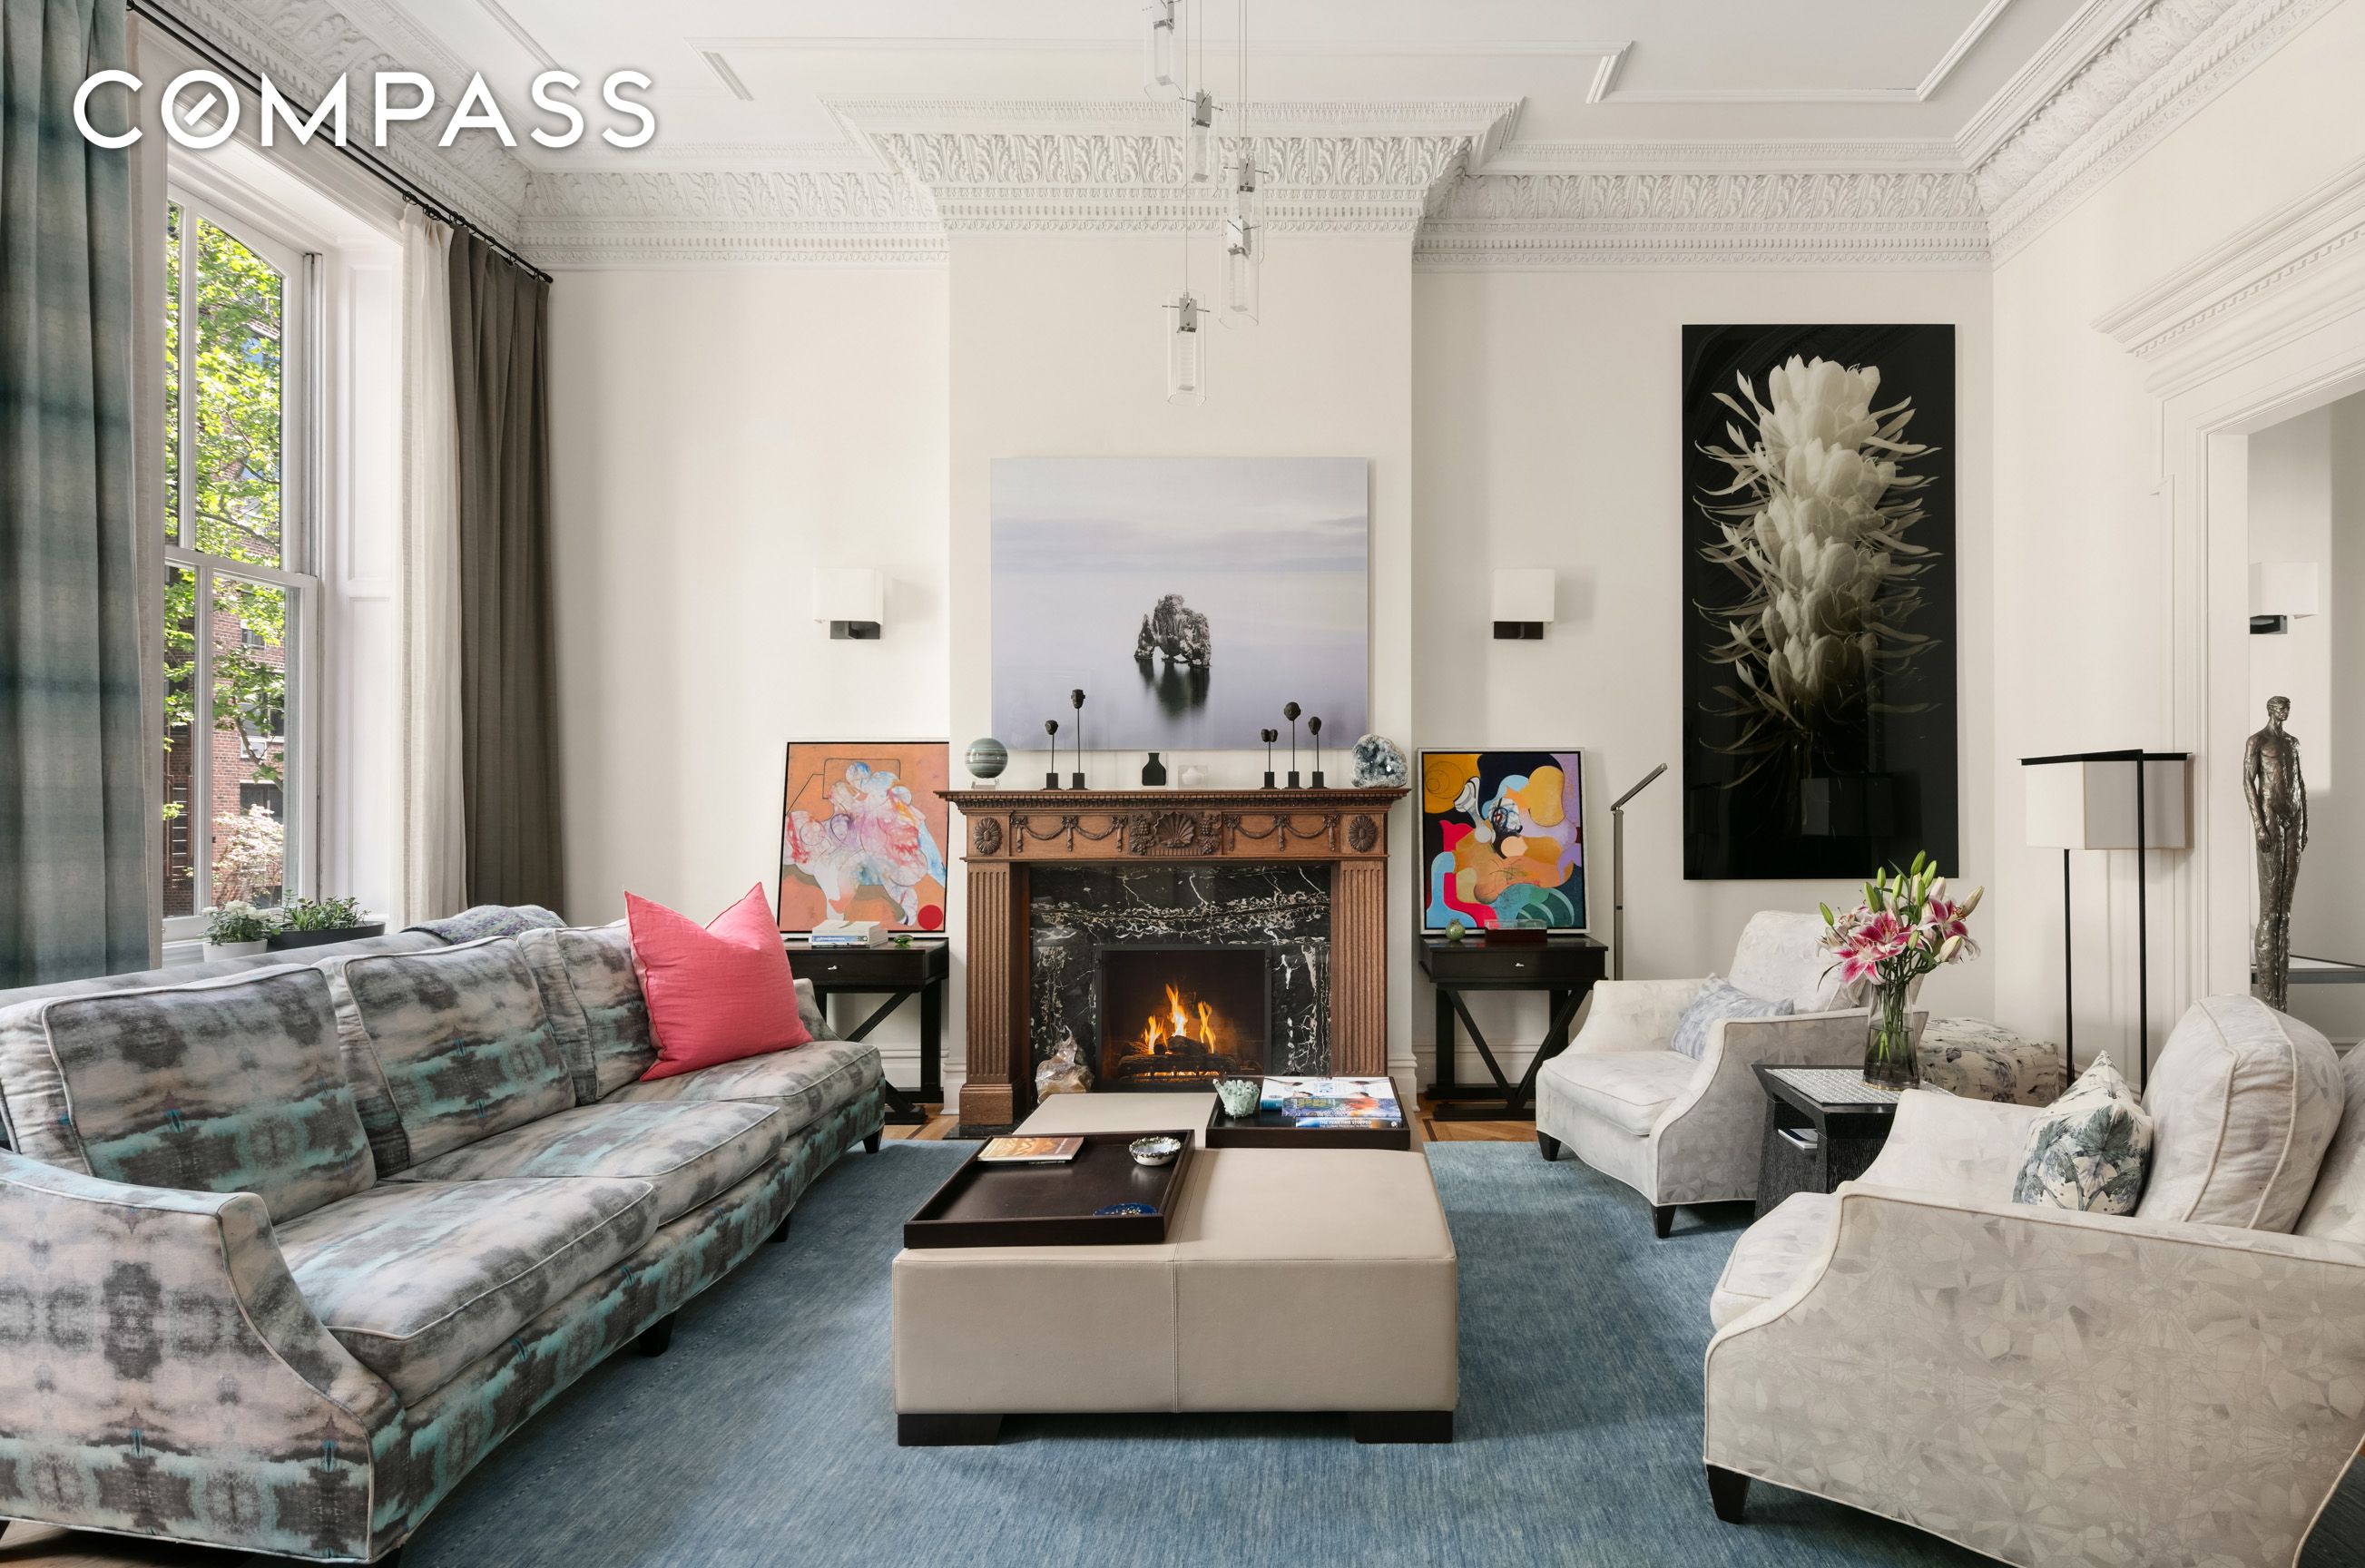 210 East 18th Street, Gramercy Park, Downtown, NYC - 6 Bedrooms  
5.5 Bathrooms  
12 Rooms - 